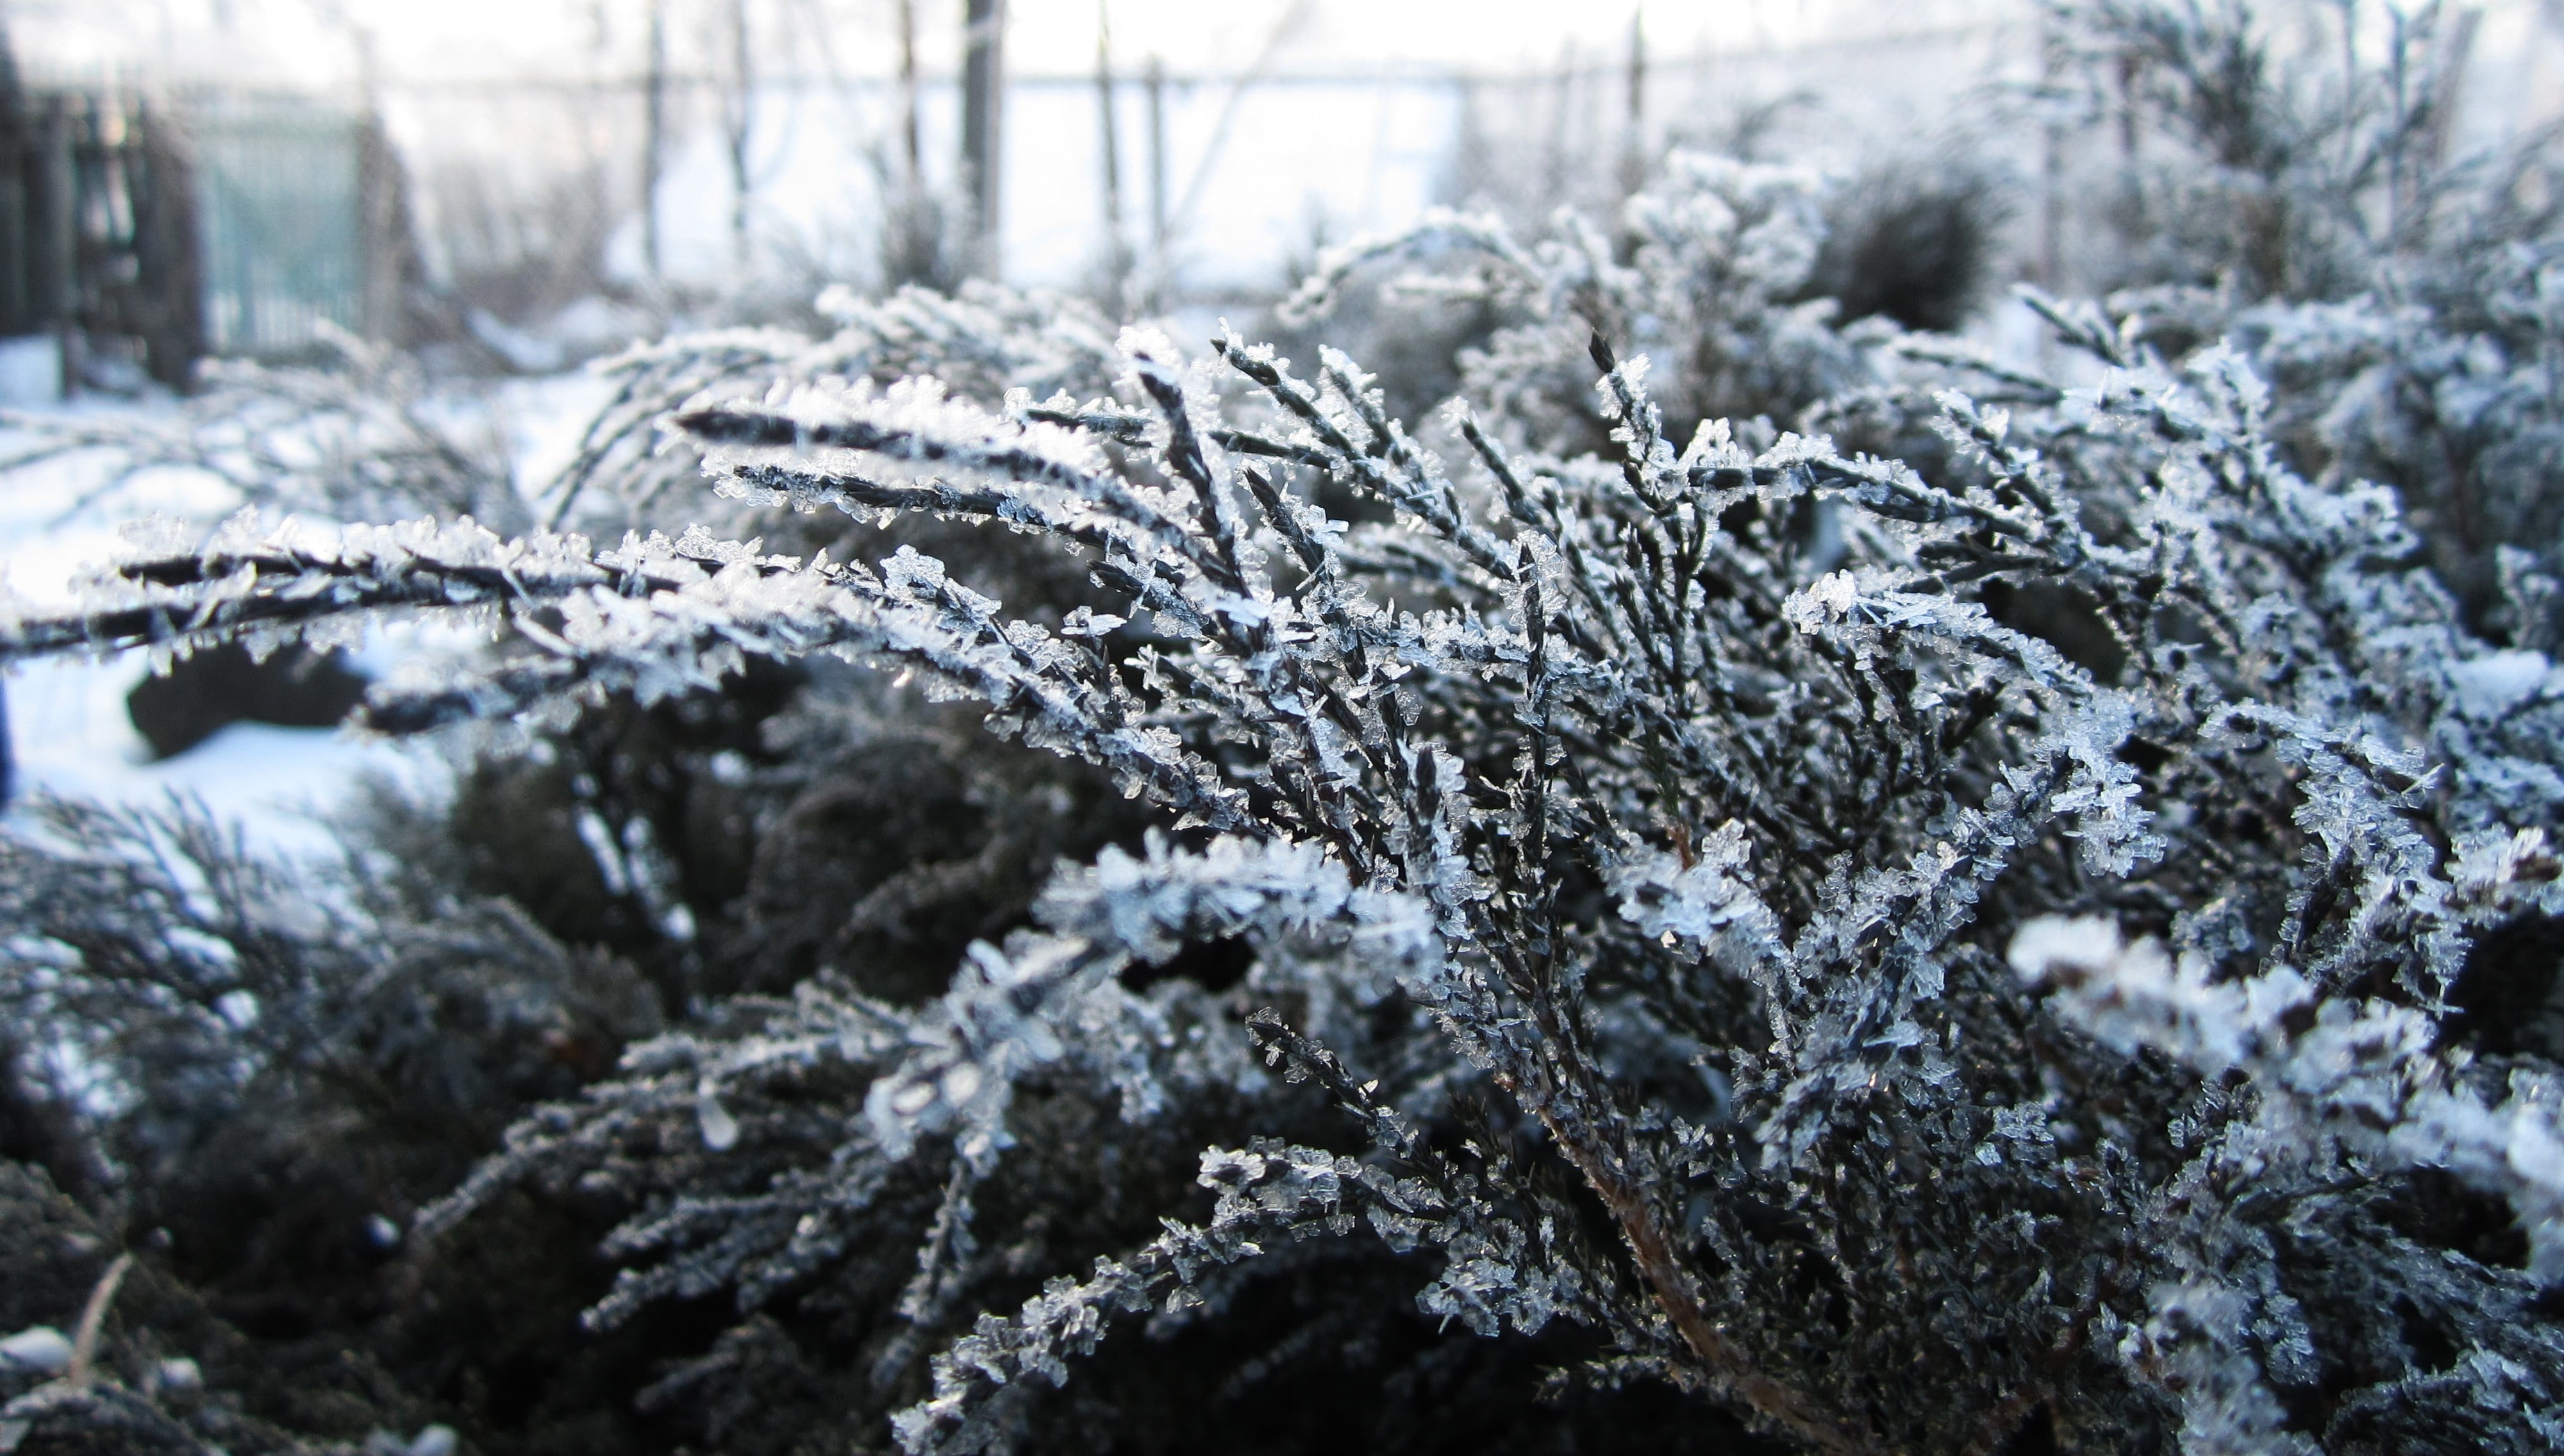 black and white floral textile, Russia, winter, snow, plants